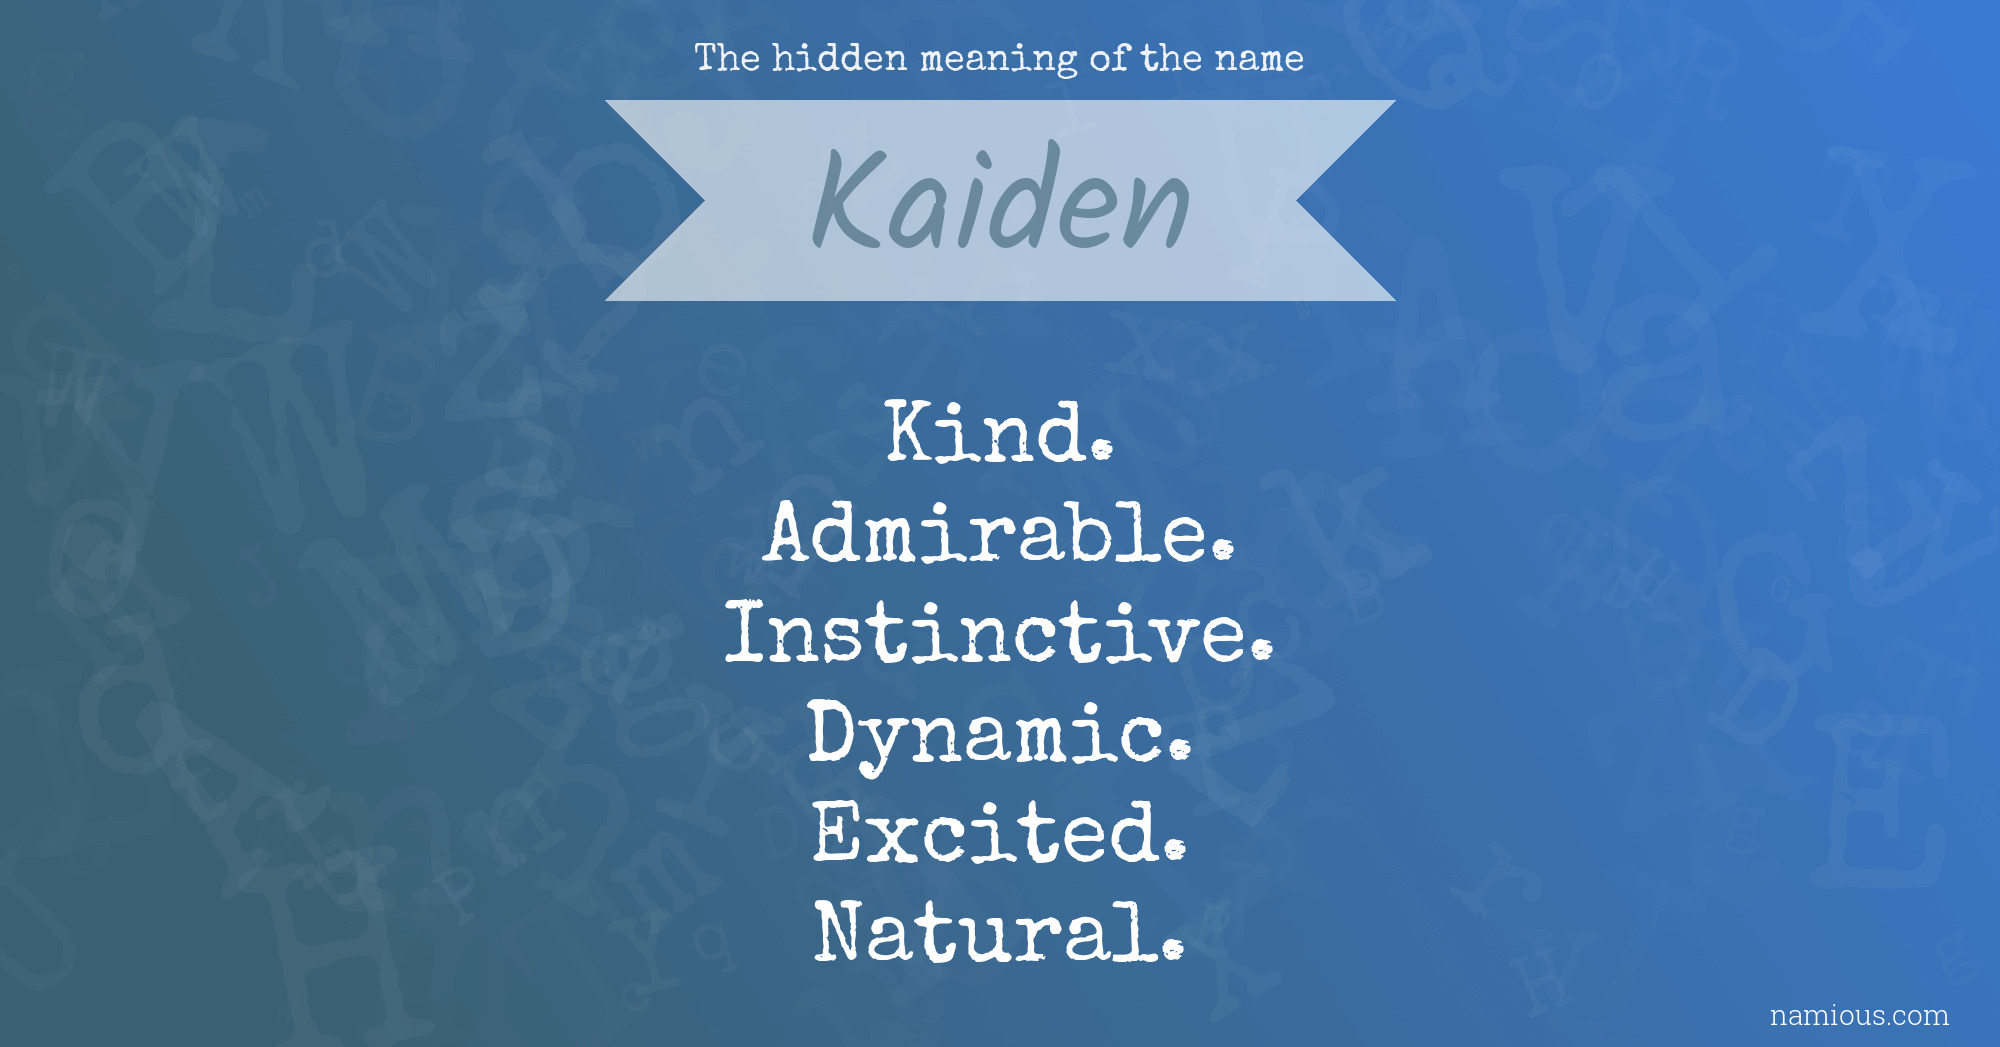 The hidden meaning of the name Kaiden